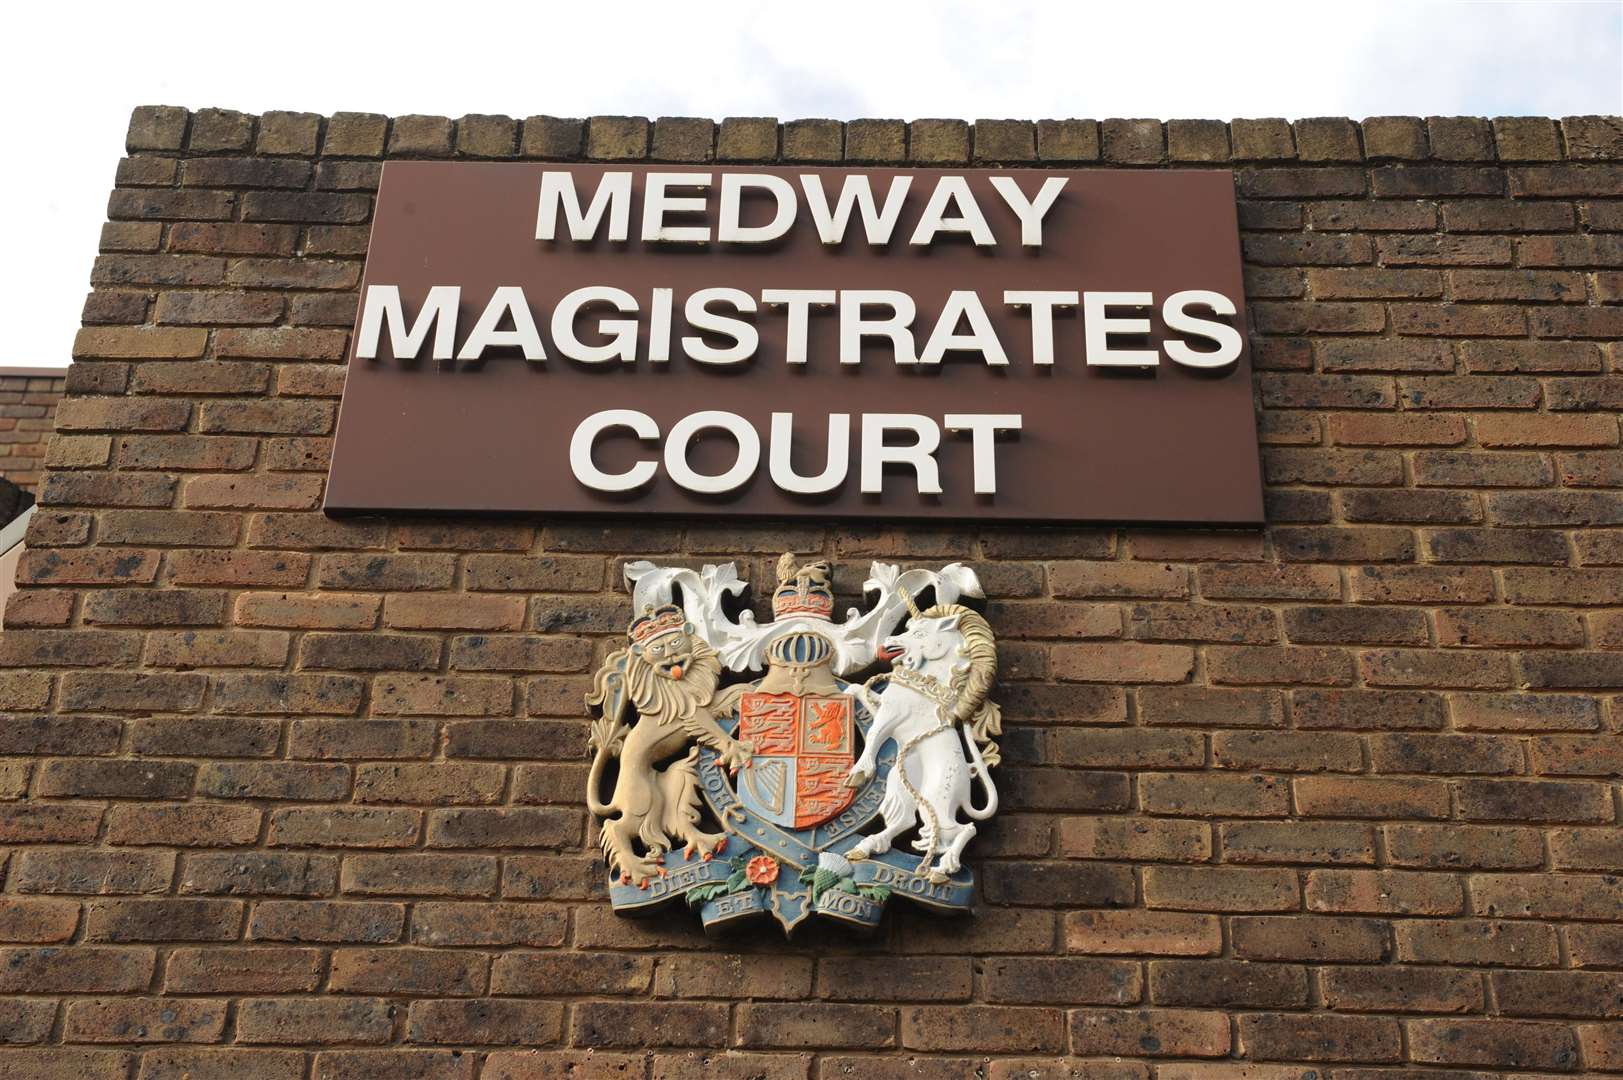 Medway Magistrates Court